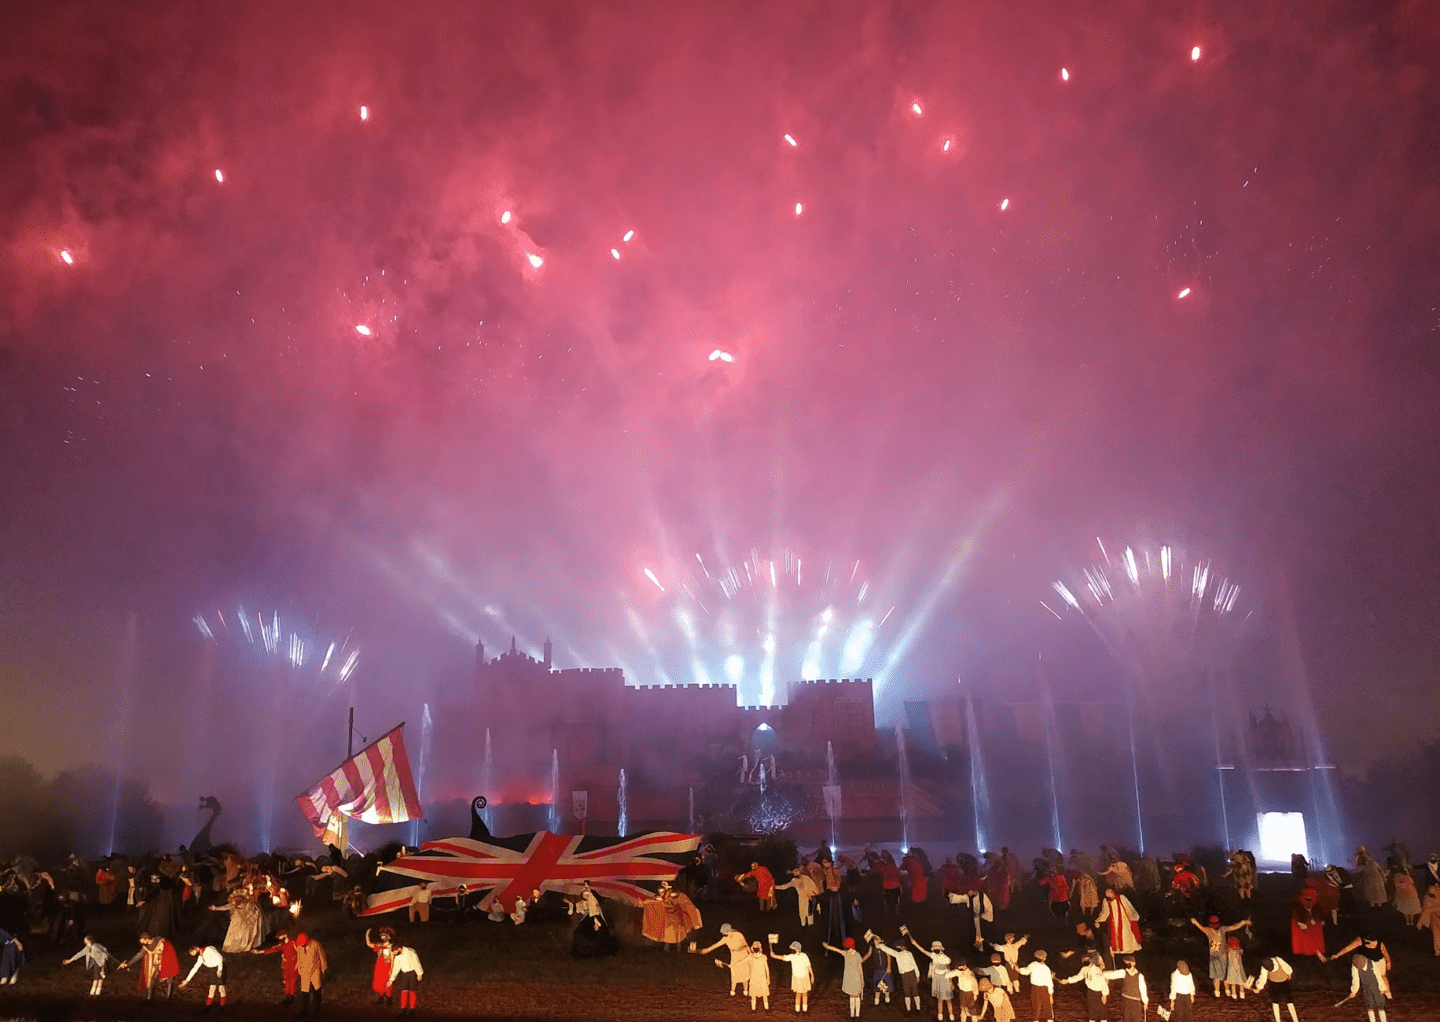 Kynren: a show of epic proportions